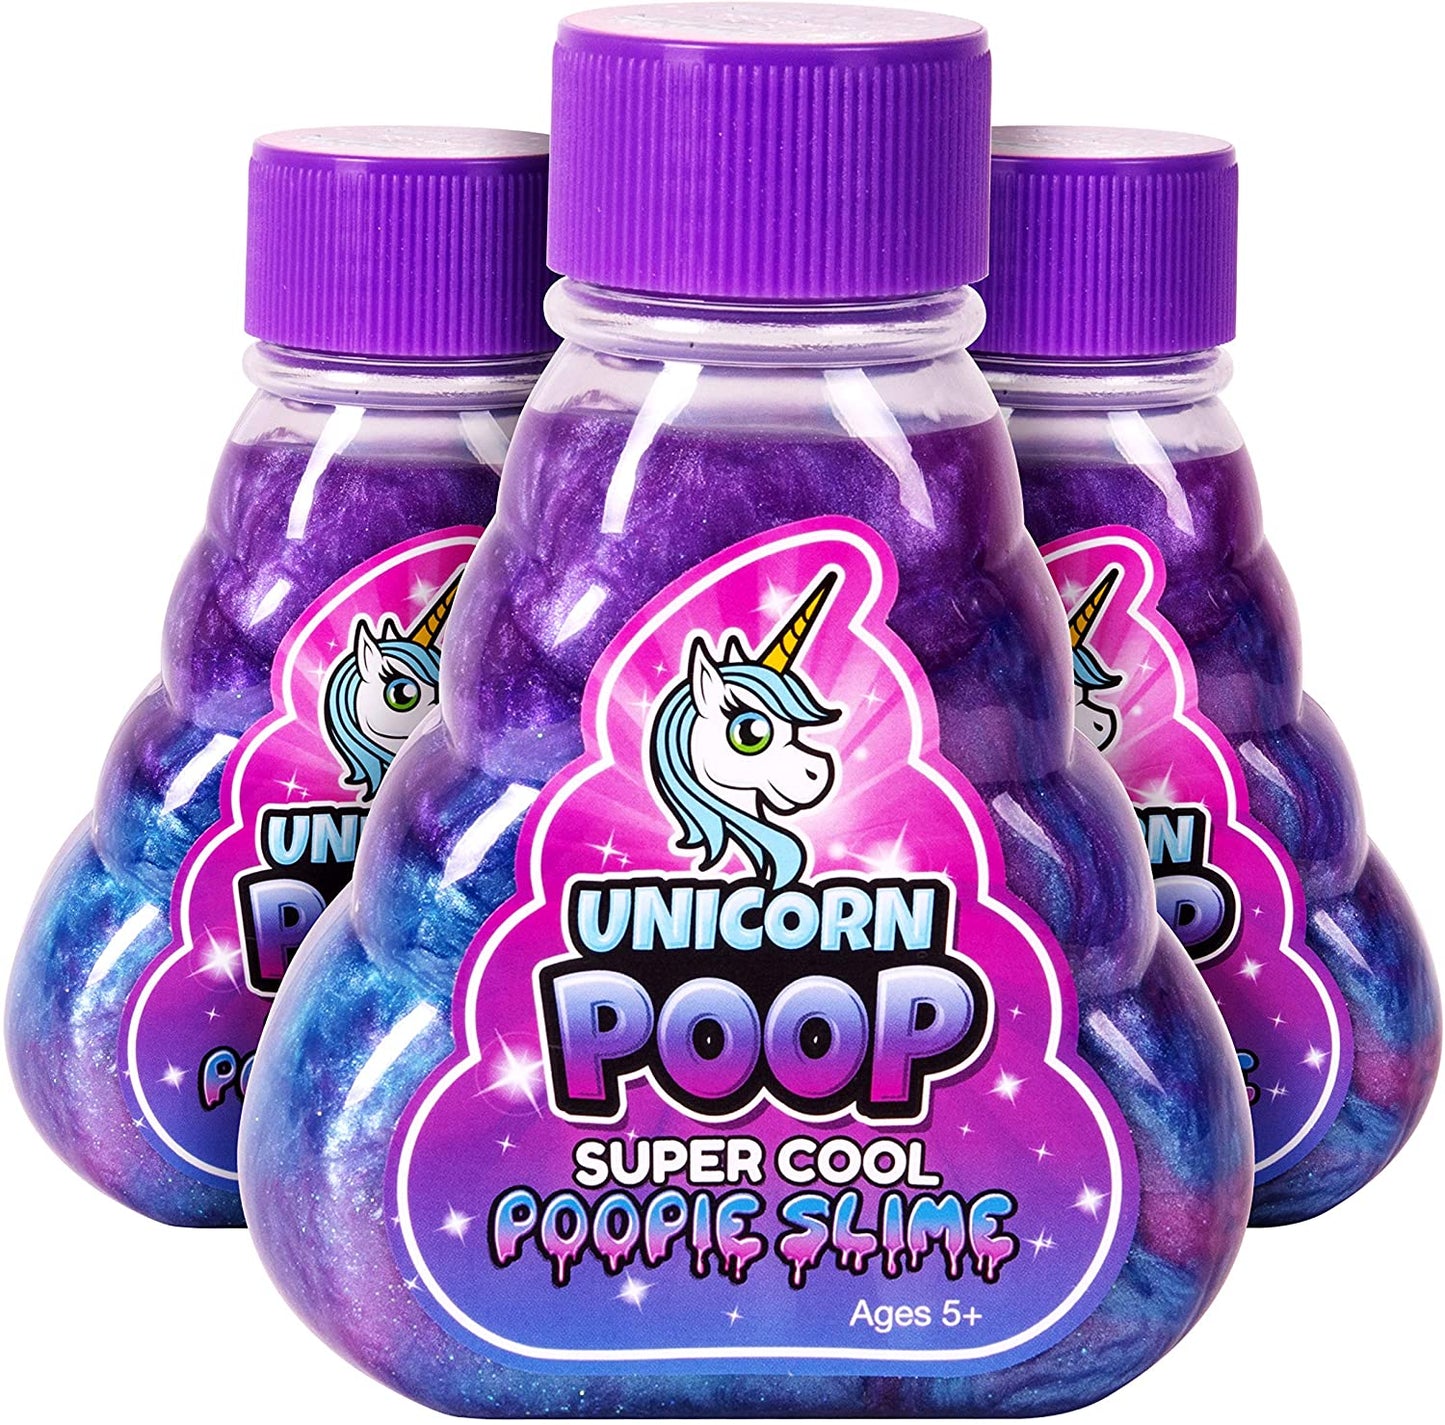 Kangaroo's Super Cool Unicorn Poop Slime - Perfect For Playing, Gift, Share, Party Favors!